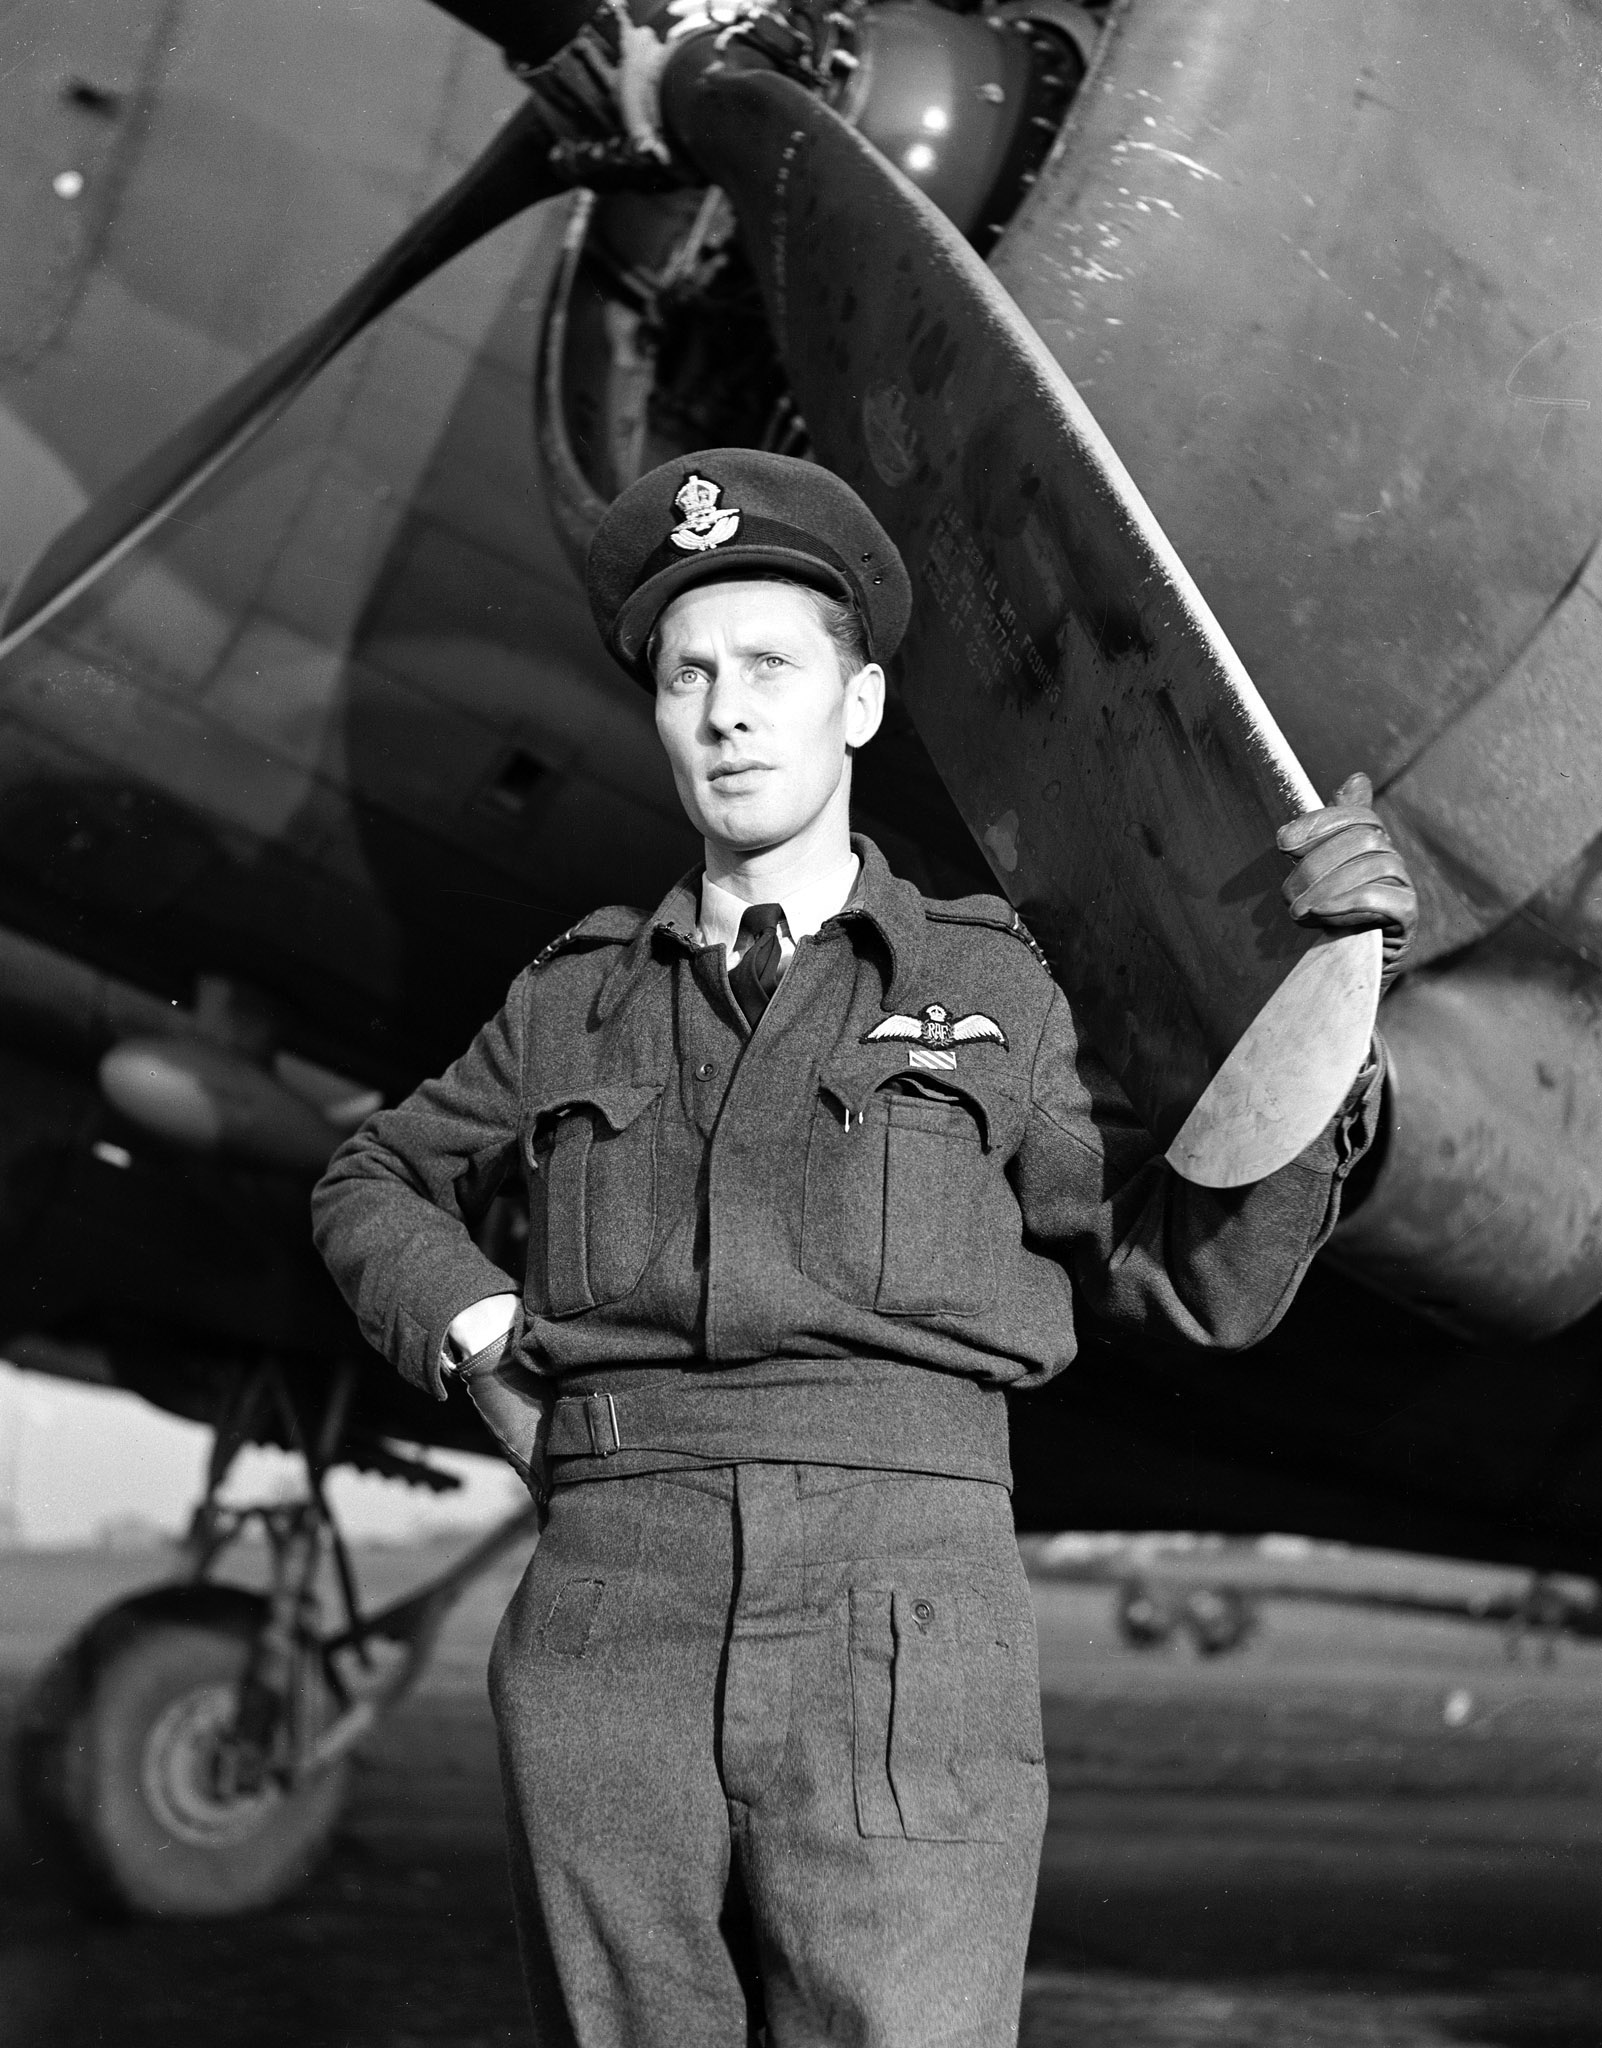 Wing Commander John A. Sproule, DFC, photographed on April 26, 1943, was the first commanding officer of 437 “Husky” Squadron, which received its baptism of fire during Operation Market Garden. PHOTO: DND Archives, PL-33879